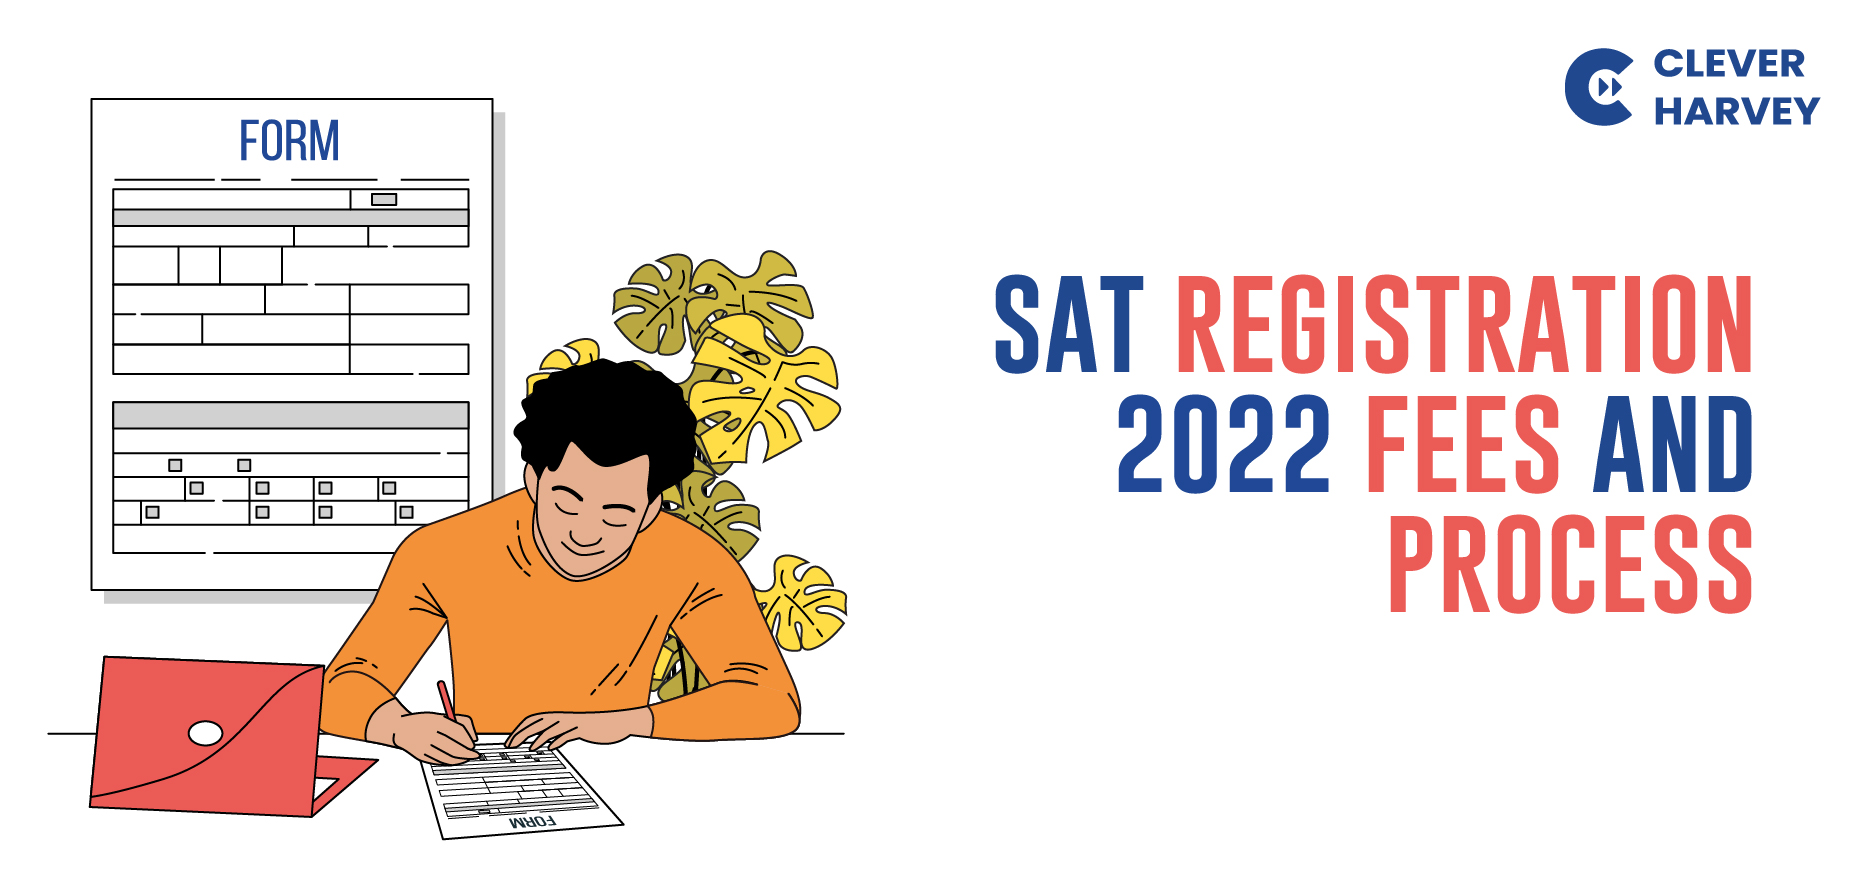 SAT Registration 2022 Fees and Process Clever Harvey